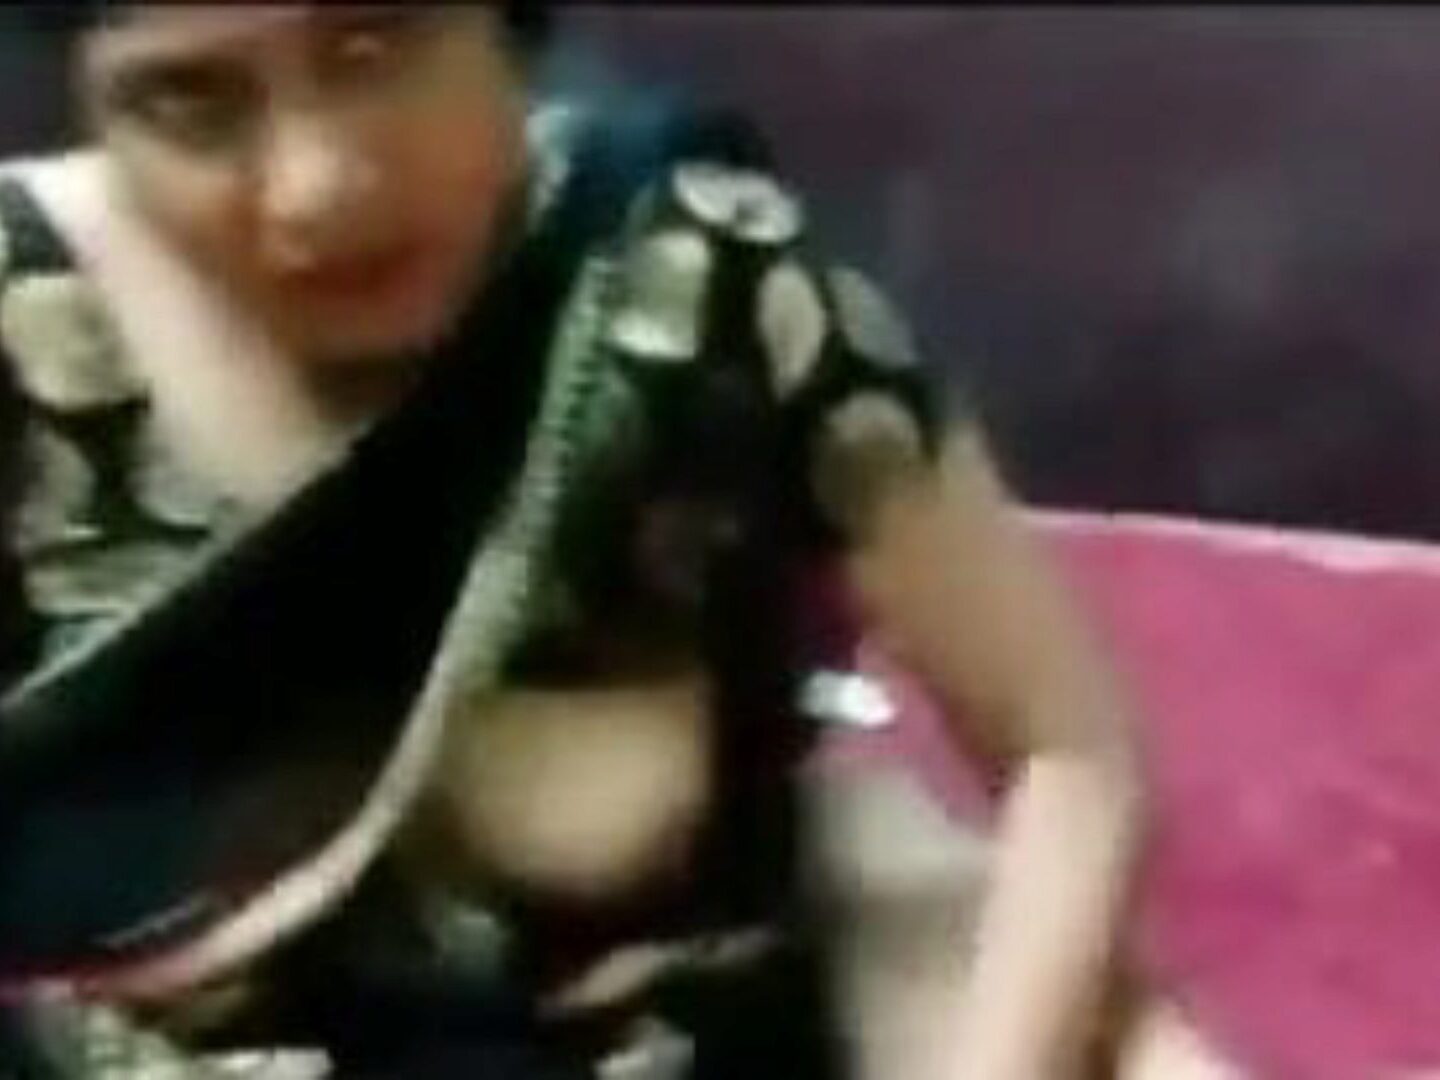 Indianxvideo - Indian Cute Girl With Forenyear Porn Sex Video - Nude Clap